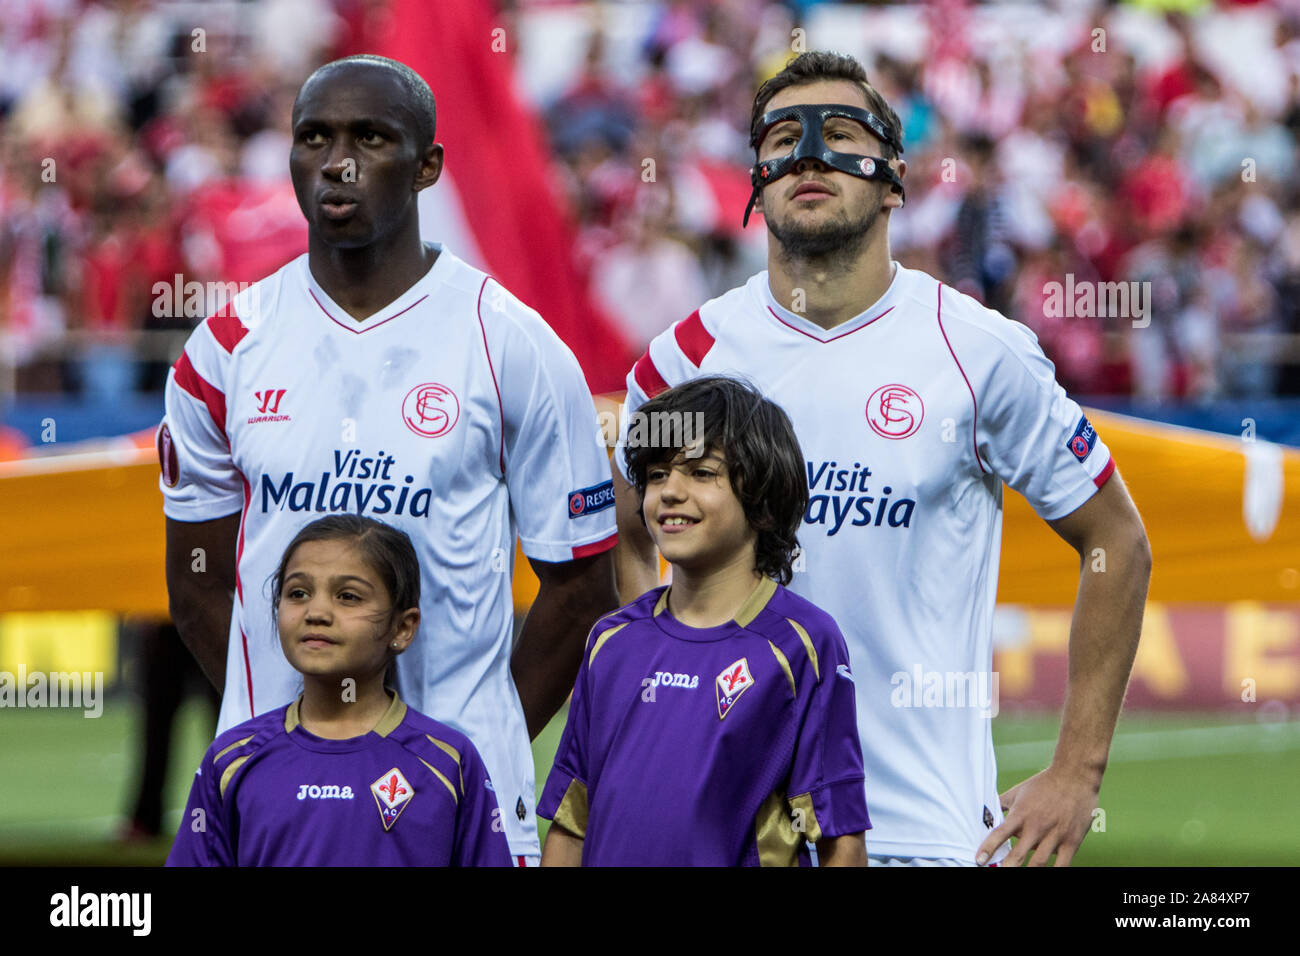 Mbia (L ) and Krychowiak (R ) of Sevilla FC before the match of Europa League (Semifinal, 1º leg) between Sevilla FC and Fiorentina at the Ramon Sanchez Pizjuan Stadium on 7 May, 2015 in Seville, Spain Stock Photo